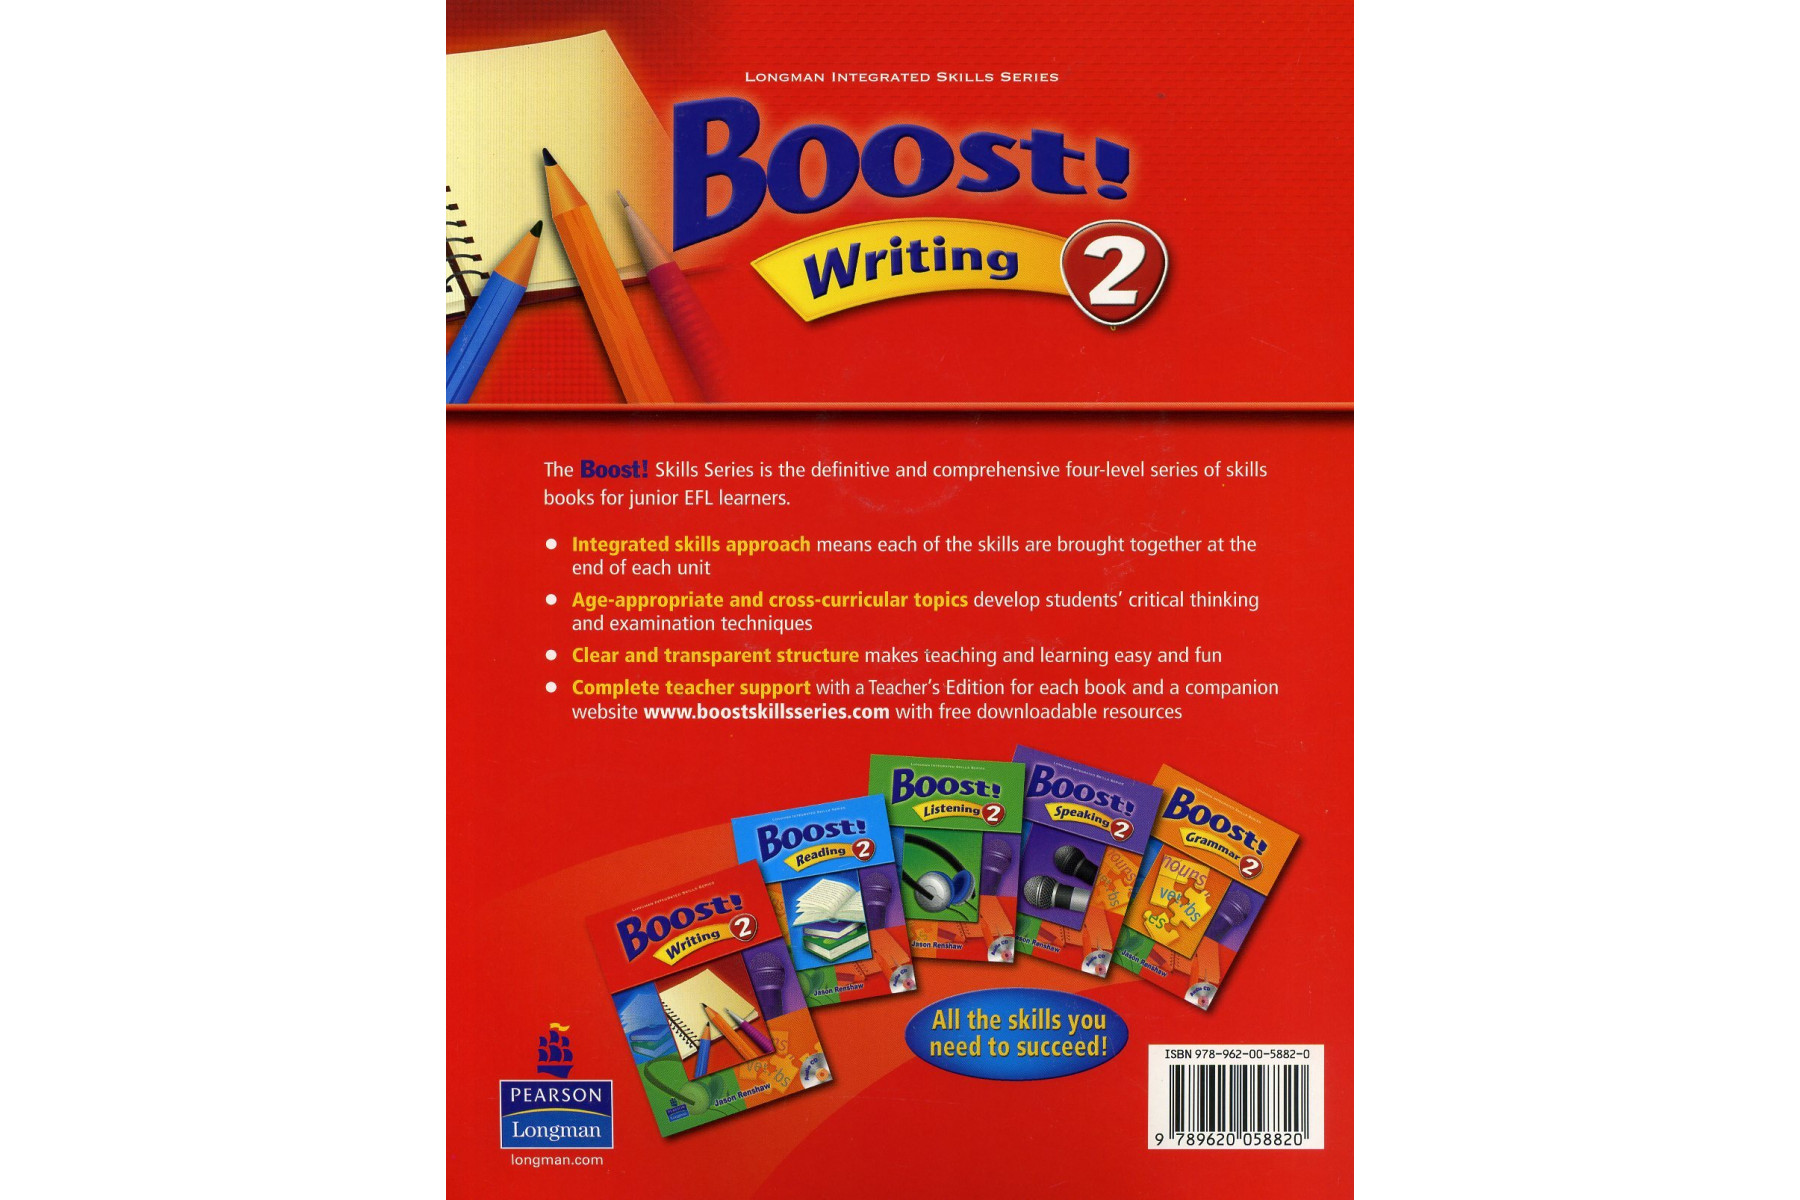 Boost! Writing: Student Book Level 2